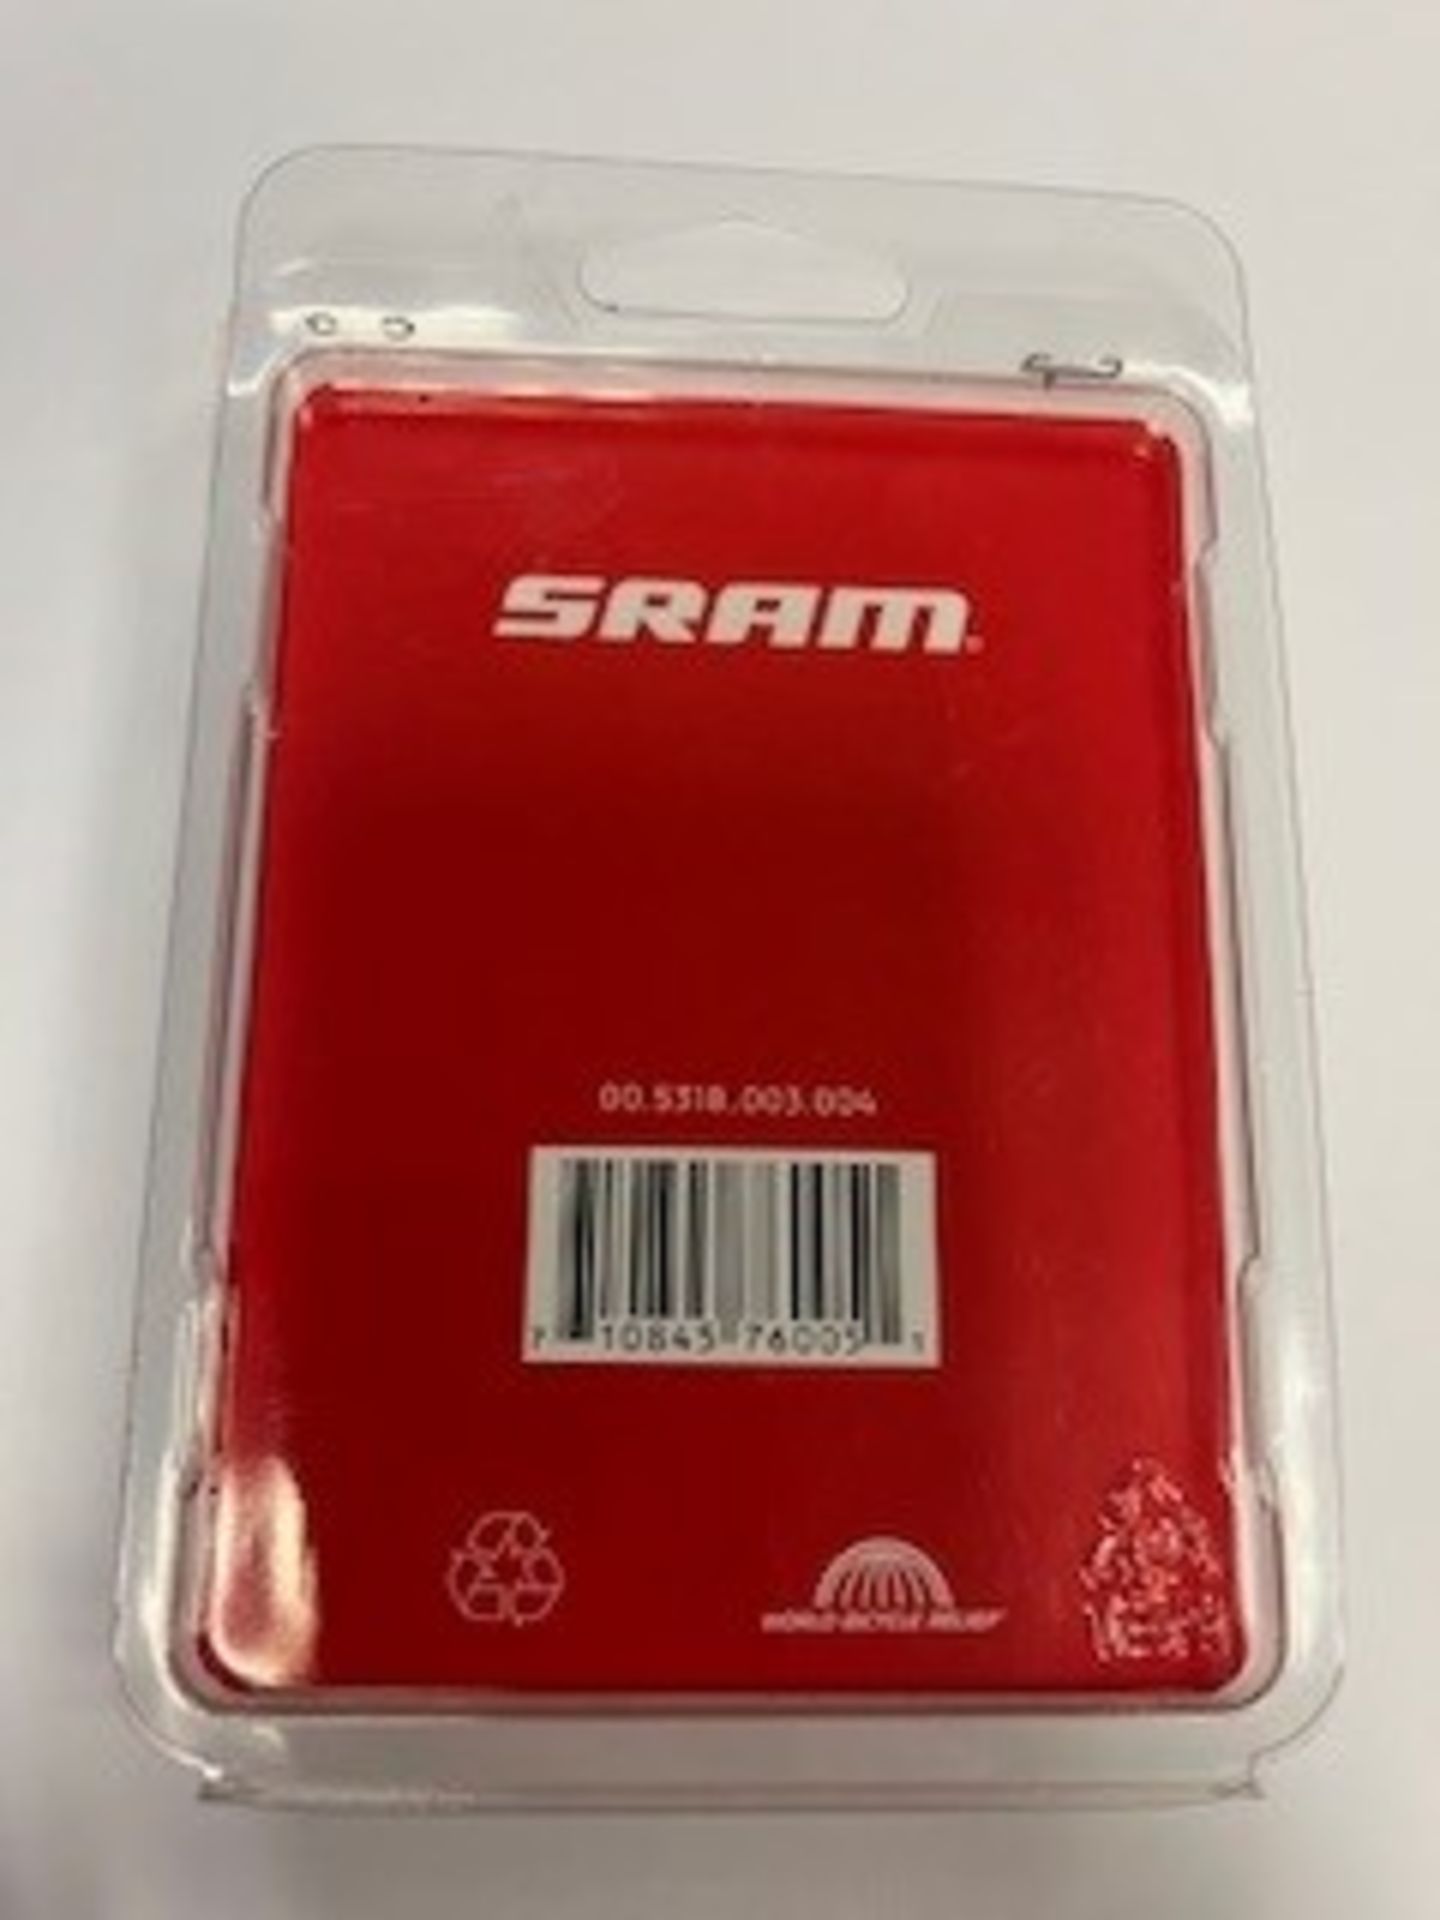 Sram Brake Pads to include 5x Disc Brake Pads Organic with Steel Backing Plate (HRD, LEVEL ULT, LEVE - Image 4 of 9